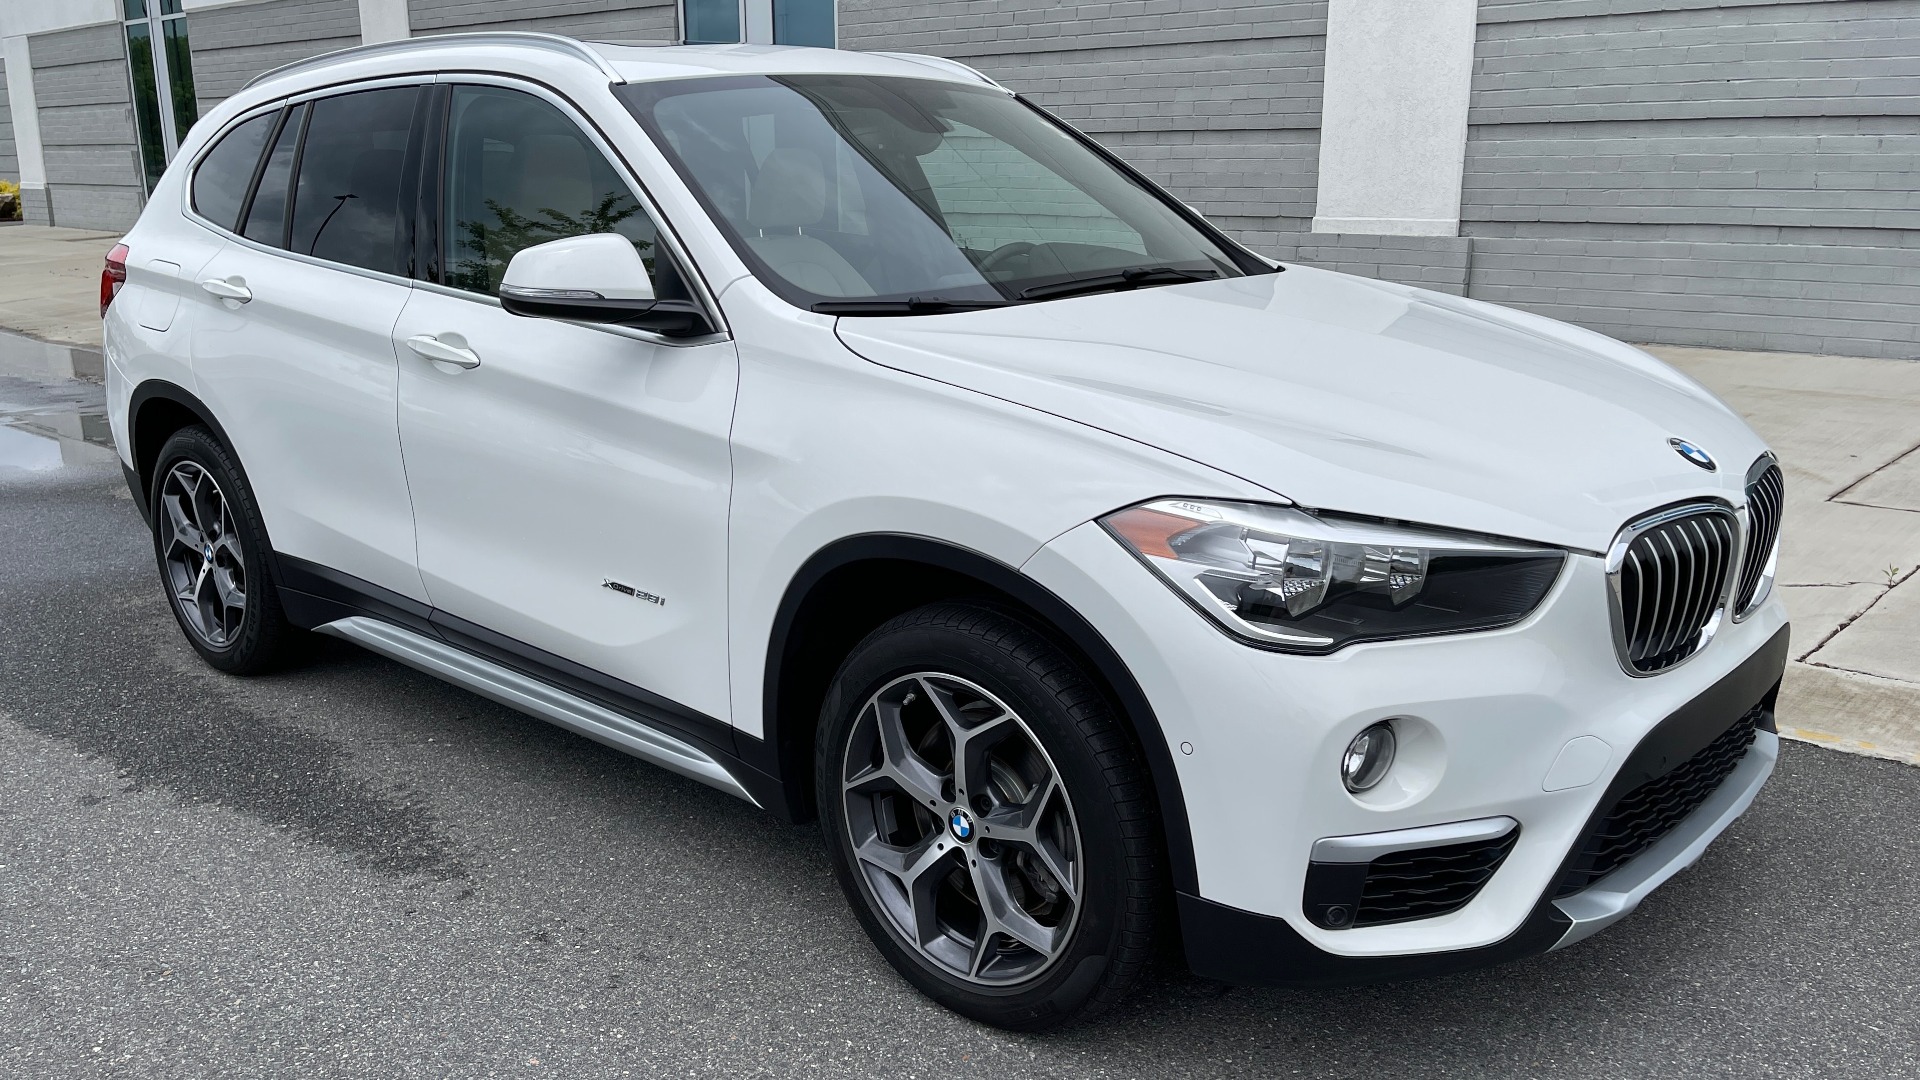 Used 2018 BMW X1 XDRIVE28I / CONV PKG / PANO-ROOF / HTD STS / PARK ASST / REARVIEW for sale Sold at Formula Imports in Charlotte NC 28227 5